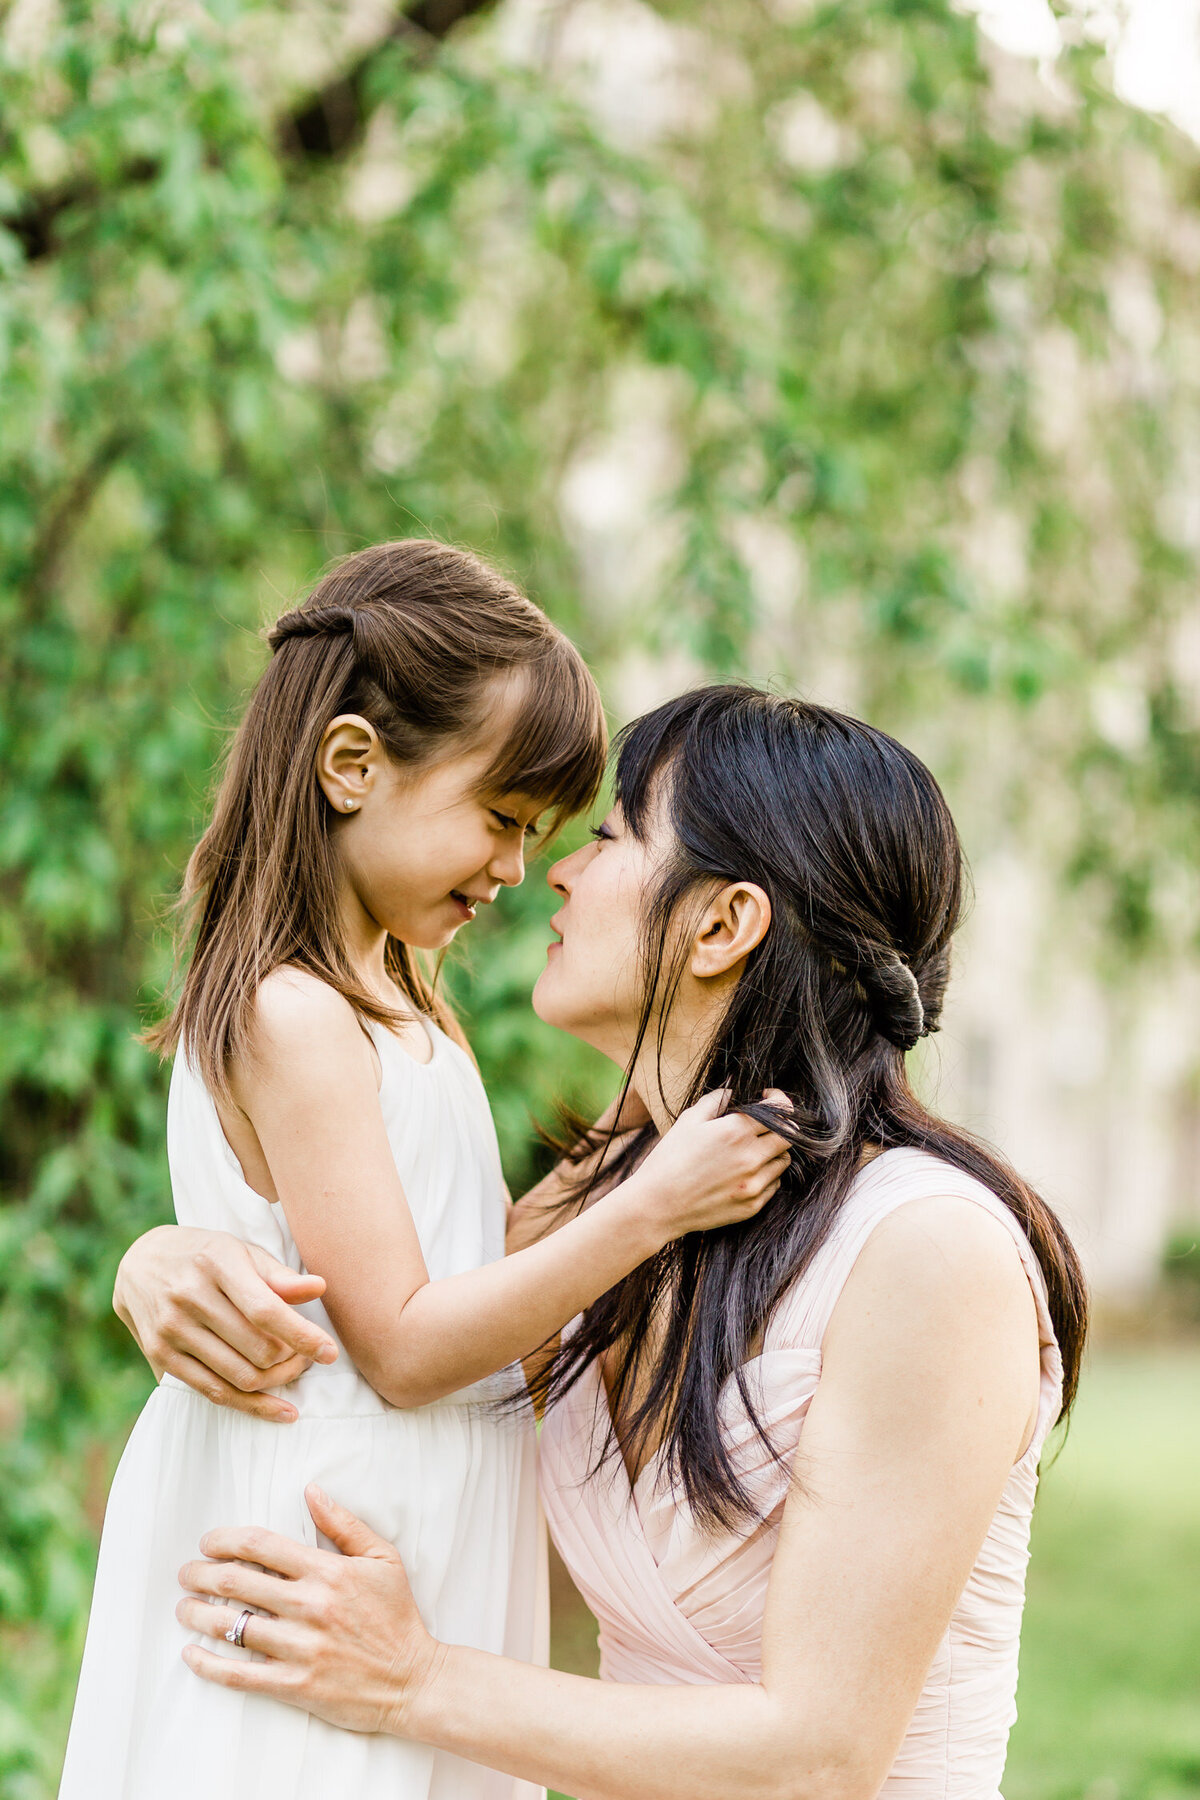 Mother and daughter embracing in NJ outdoor photo  shoot in Westfield, NJ